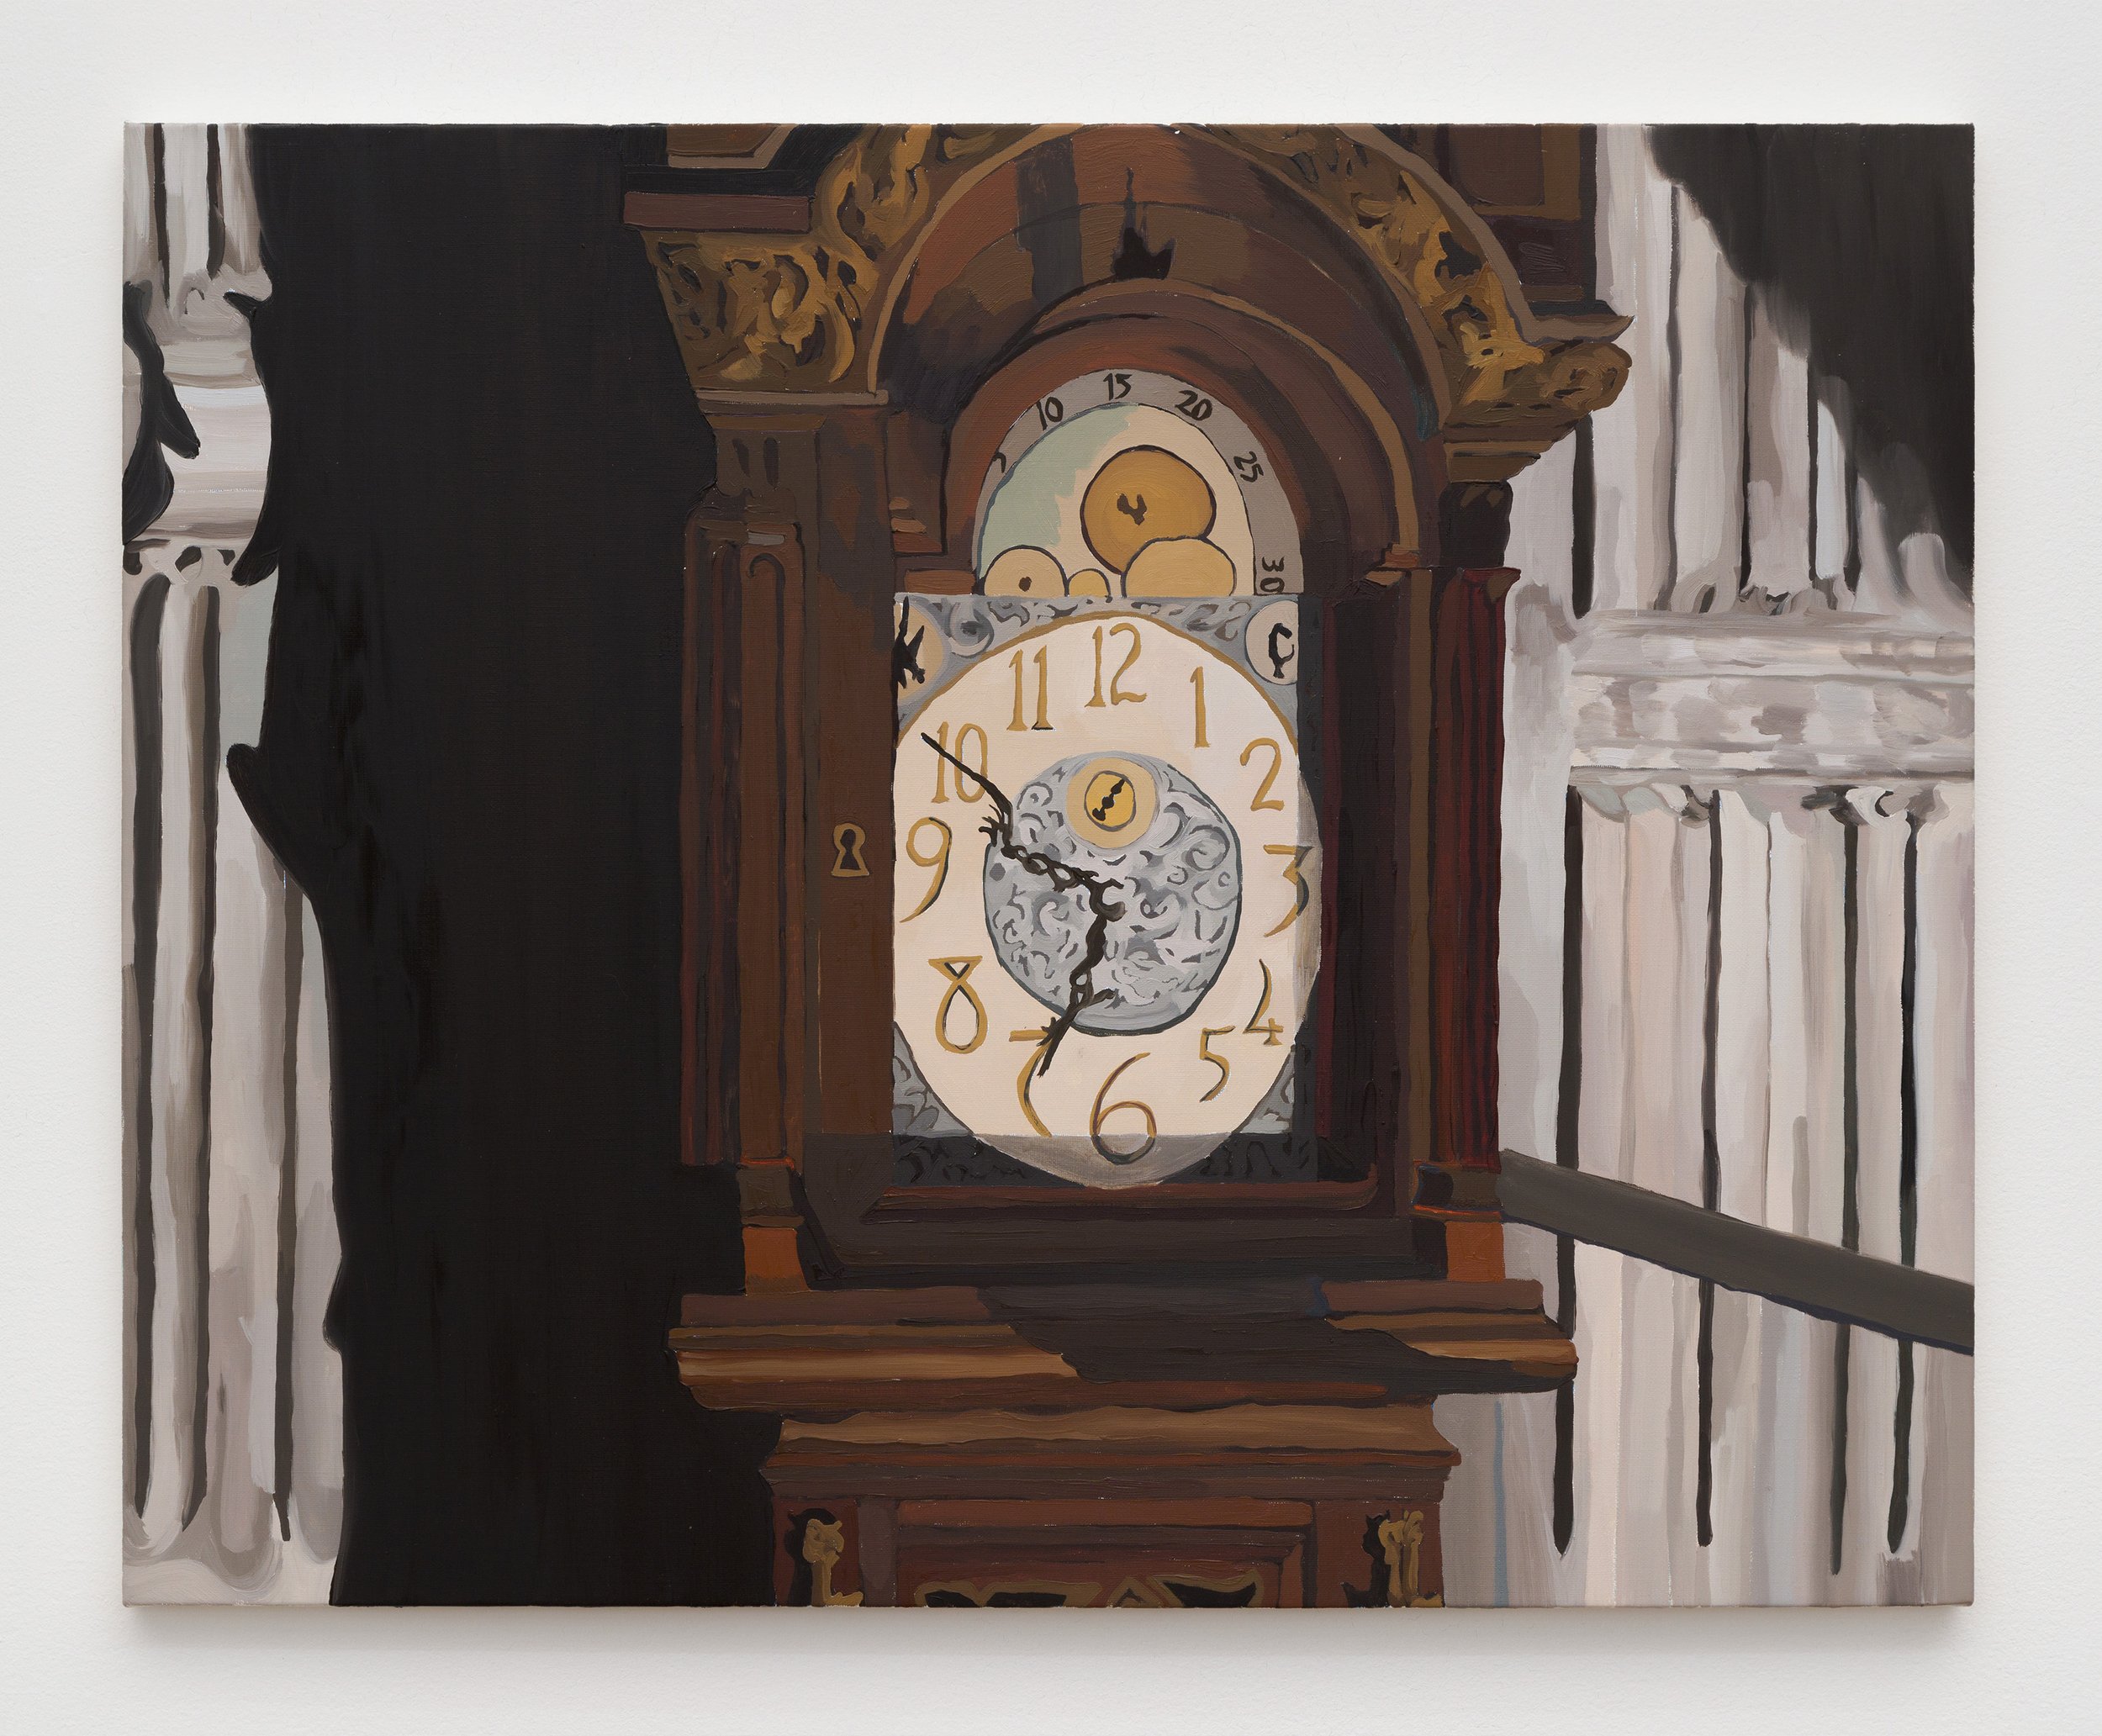  Alex Chaves,  Clock 1 (still from Rebecca 1940) , 2021, Oil on linen, 24 x 30 in 